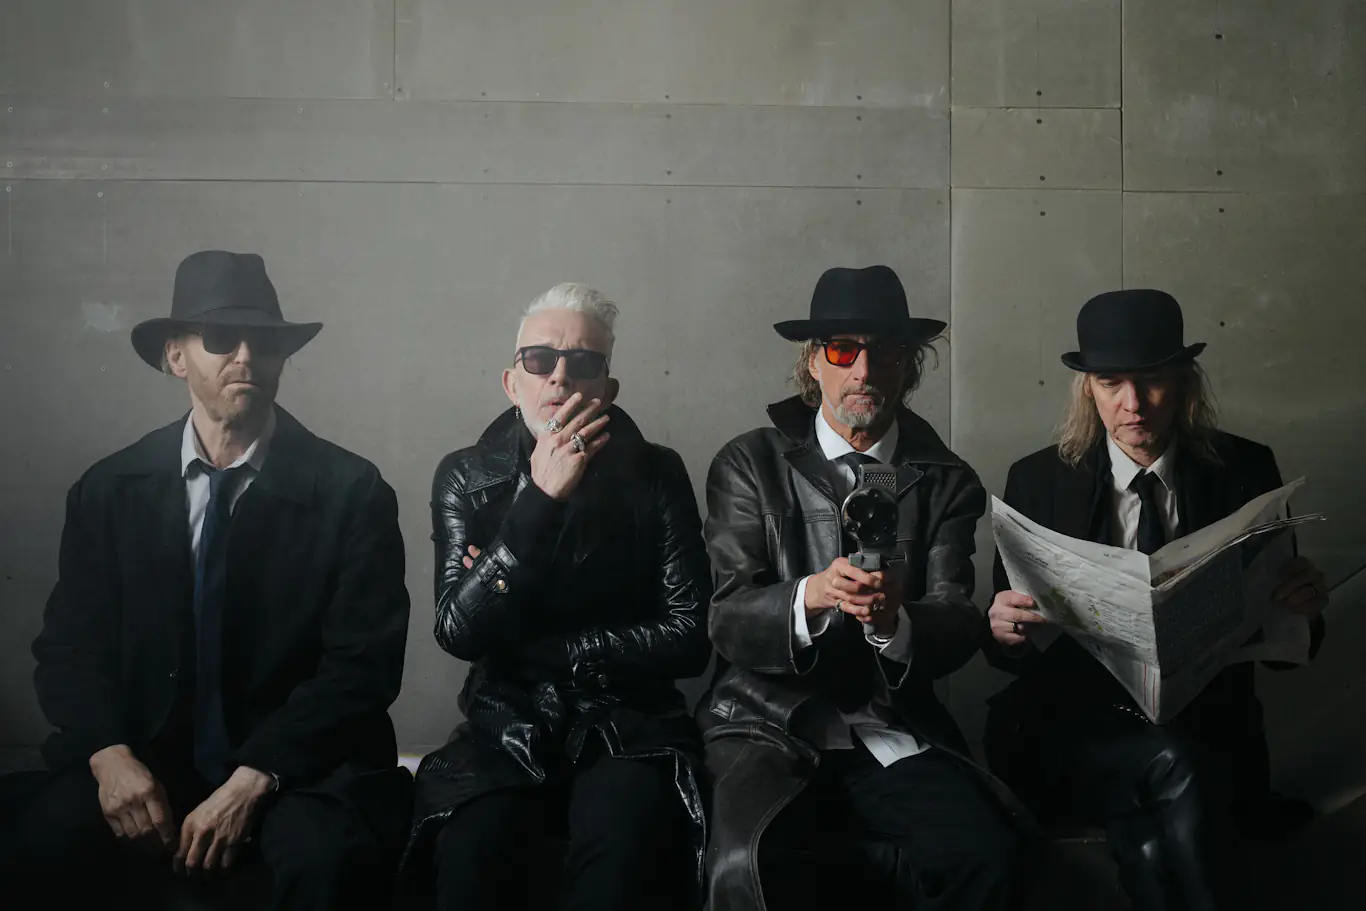 ALABAMA 3 enlist The Sopranos’ Dominic Chianese for new single ‘If I’d Never Seen The Sunshine’